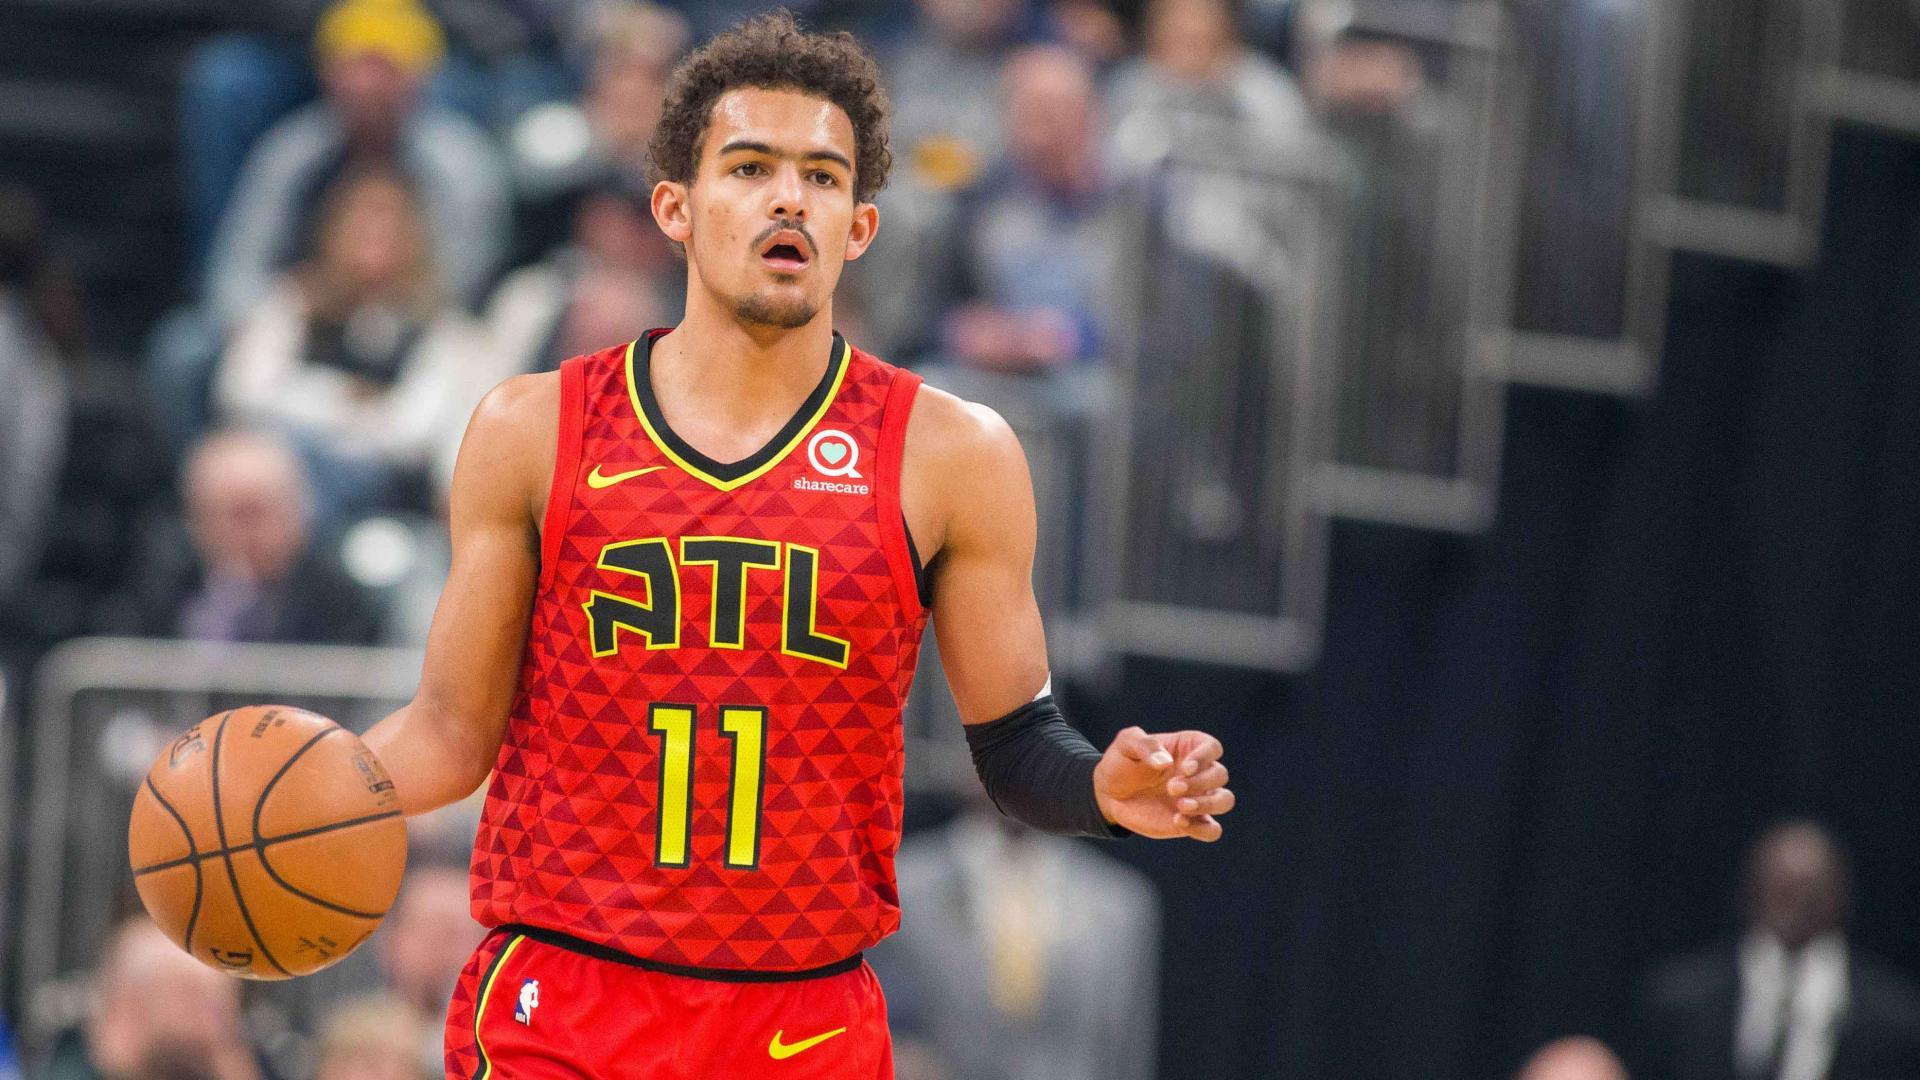 Pairing with Trae Young